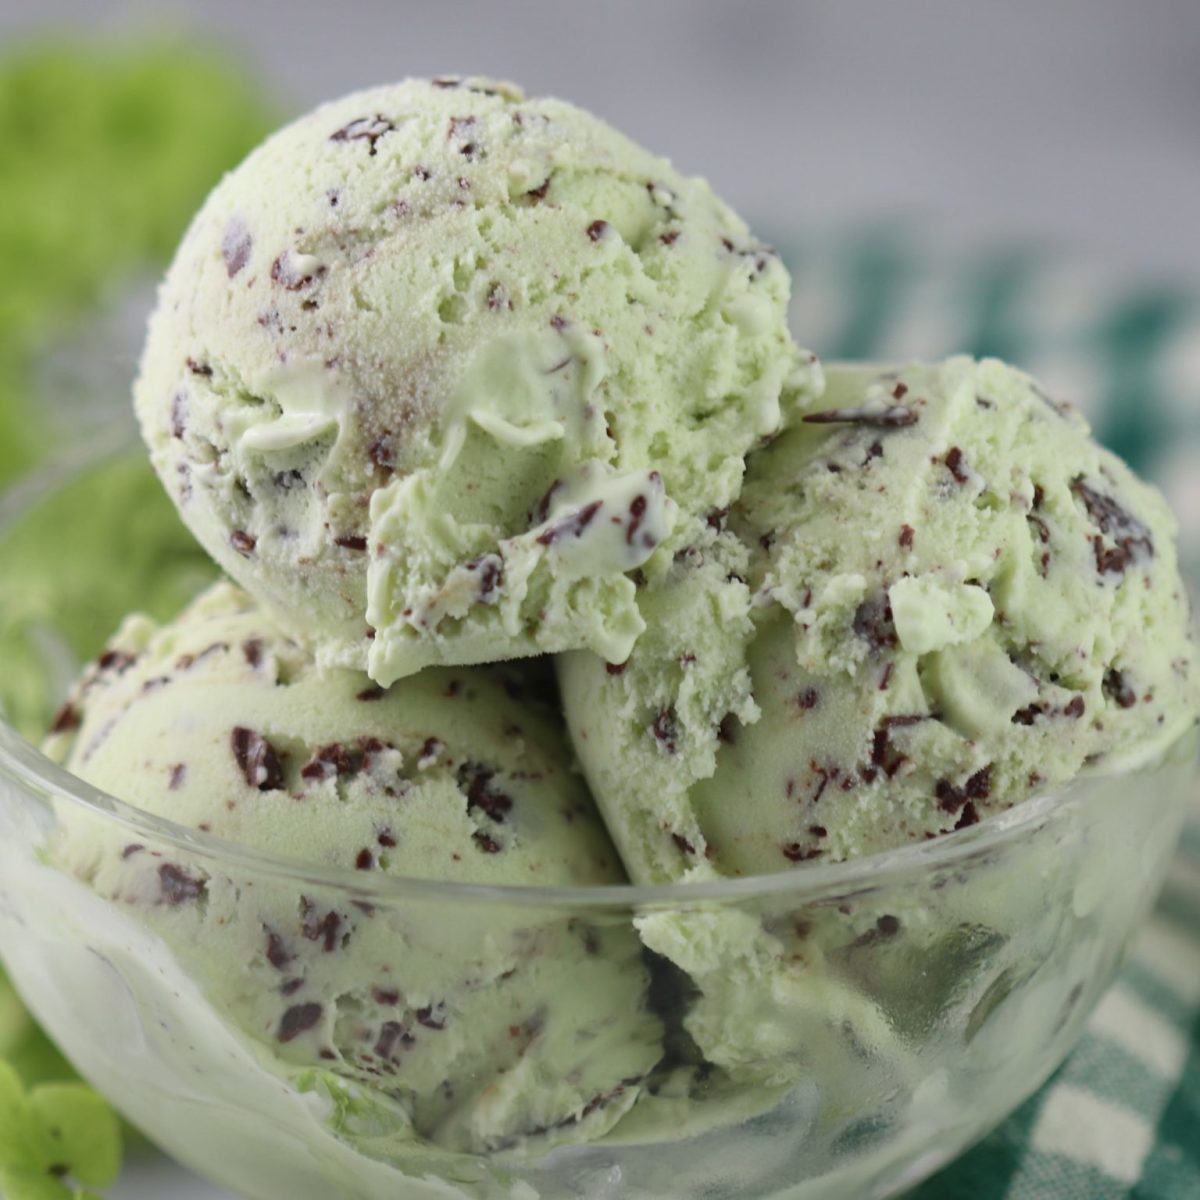 Cool and refreshing mint chocolate chip ice cream